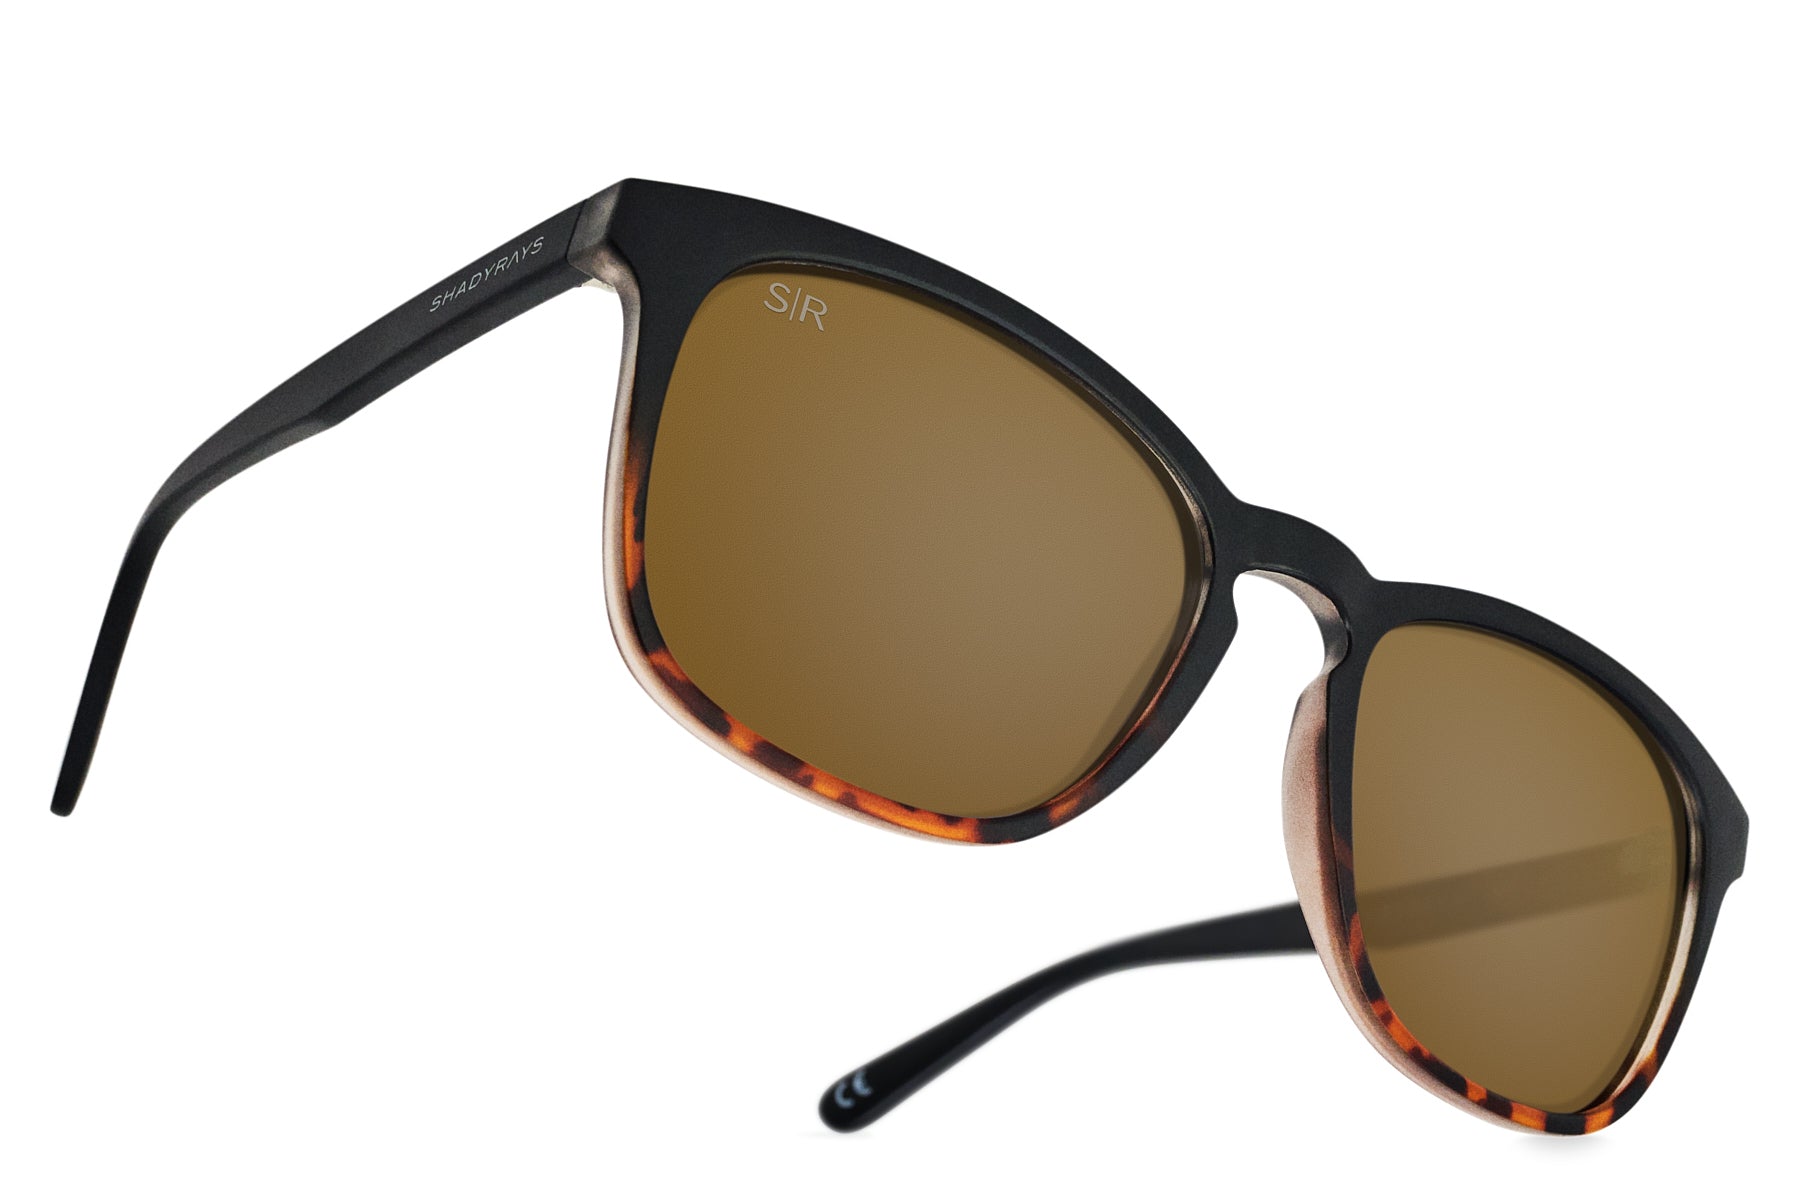 Cypress - Black Tortoise Polarized Sunglasses | Tortoise Sunglasses | Best Christmas Gifts | Gifts for the Holidays | Unique Gifts for Friends| Shady